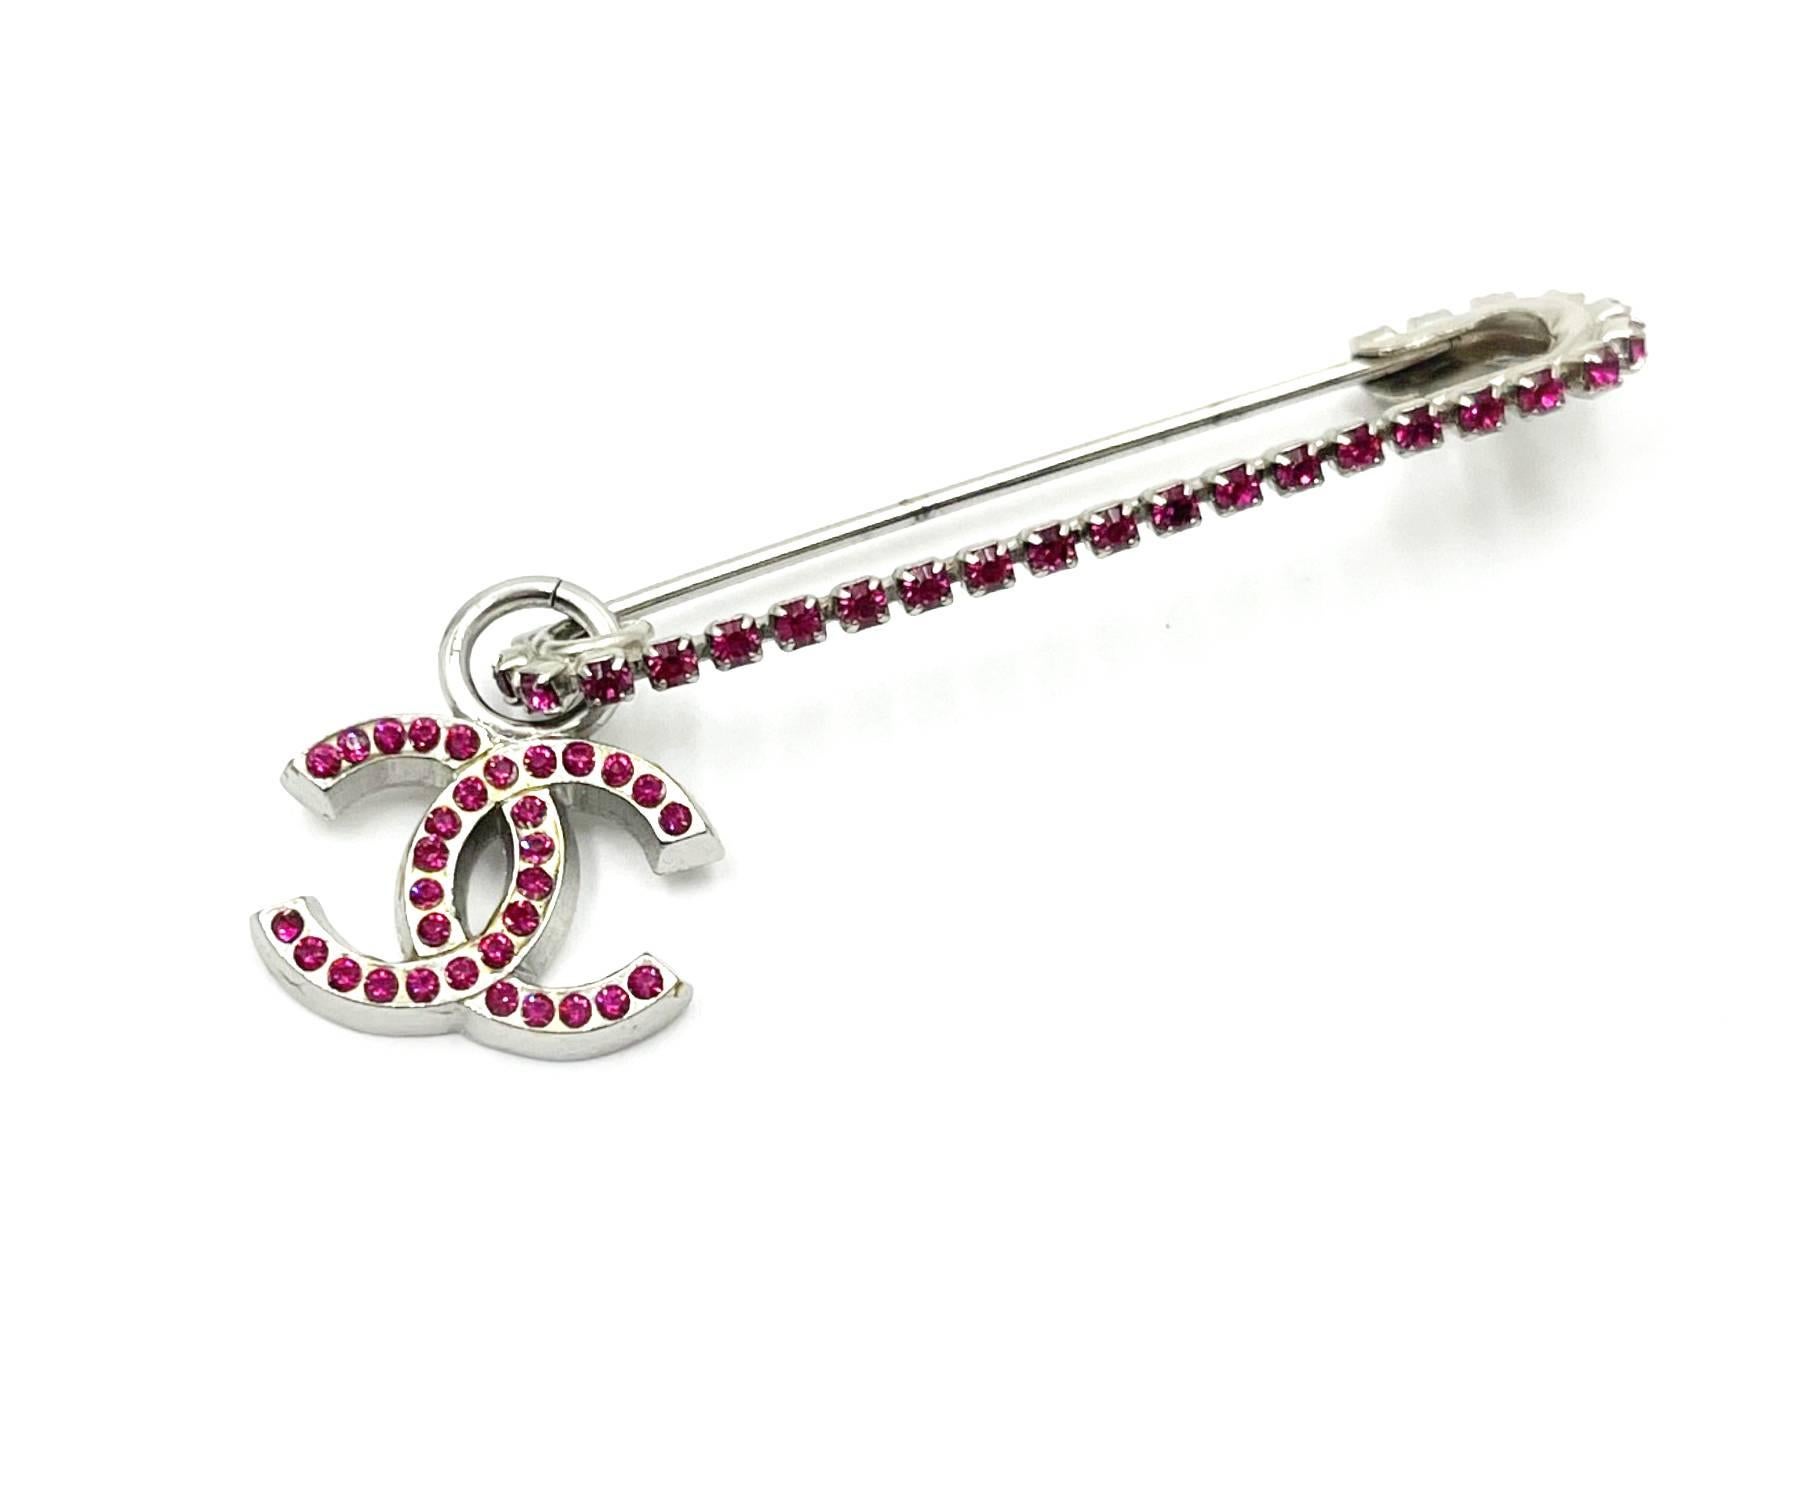 Chanel Silver CC Fuchsia Crystal Safety Pin

*Marked 02
*Made in France

-The safety pin is approximately 2″ x 0.5″.
-The pendant is approximately 0.75″ x 0.5″.
-Very unique and pretty
-In a pristine condition

AB2022-00421

